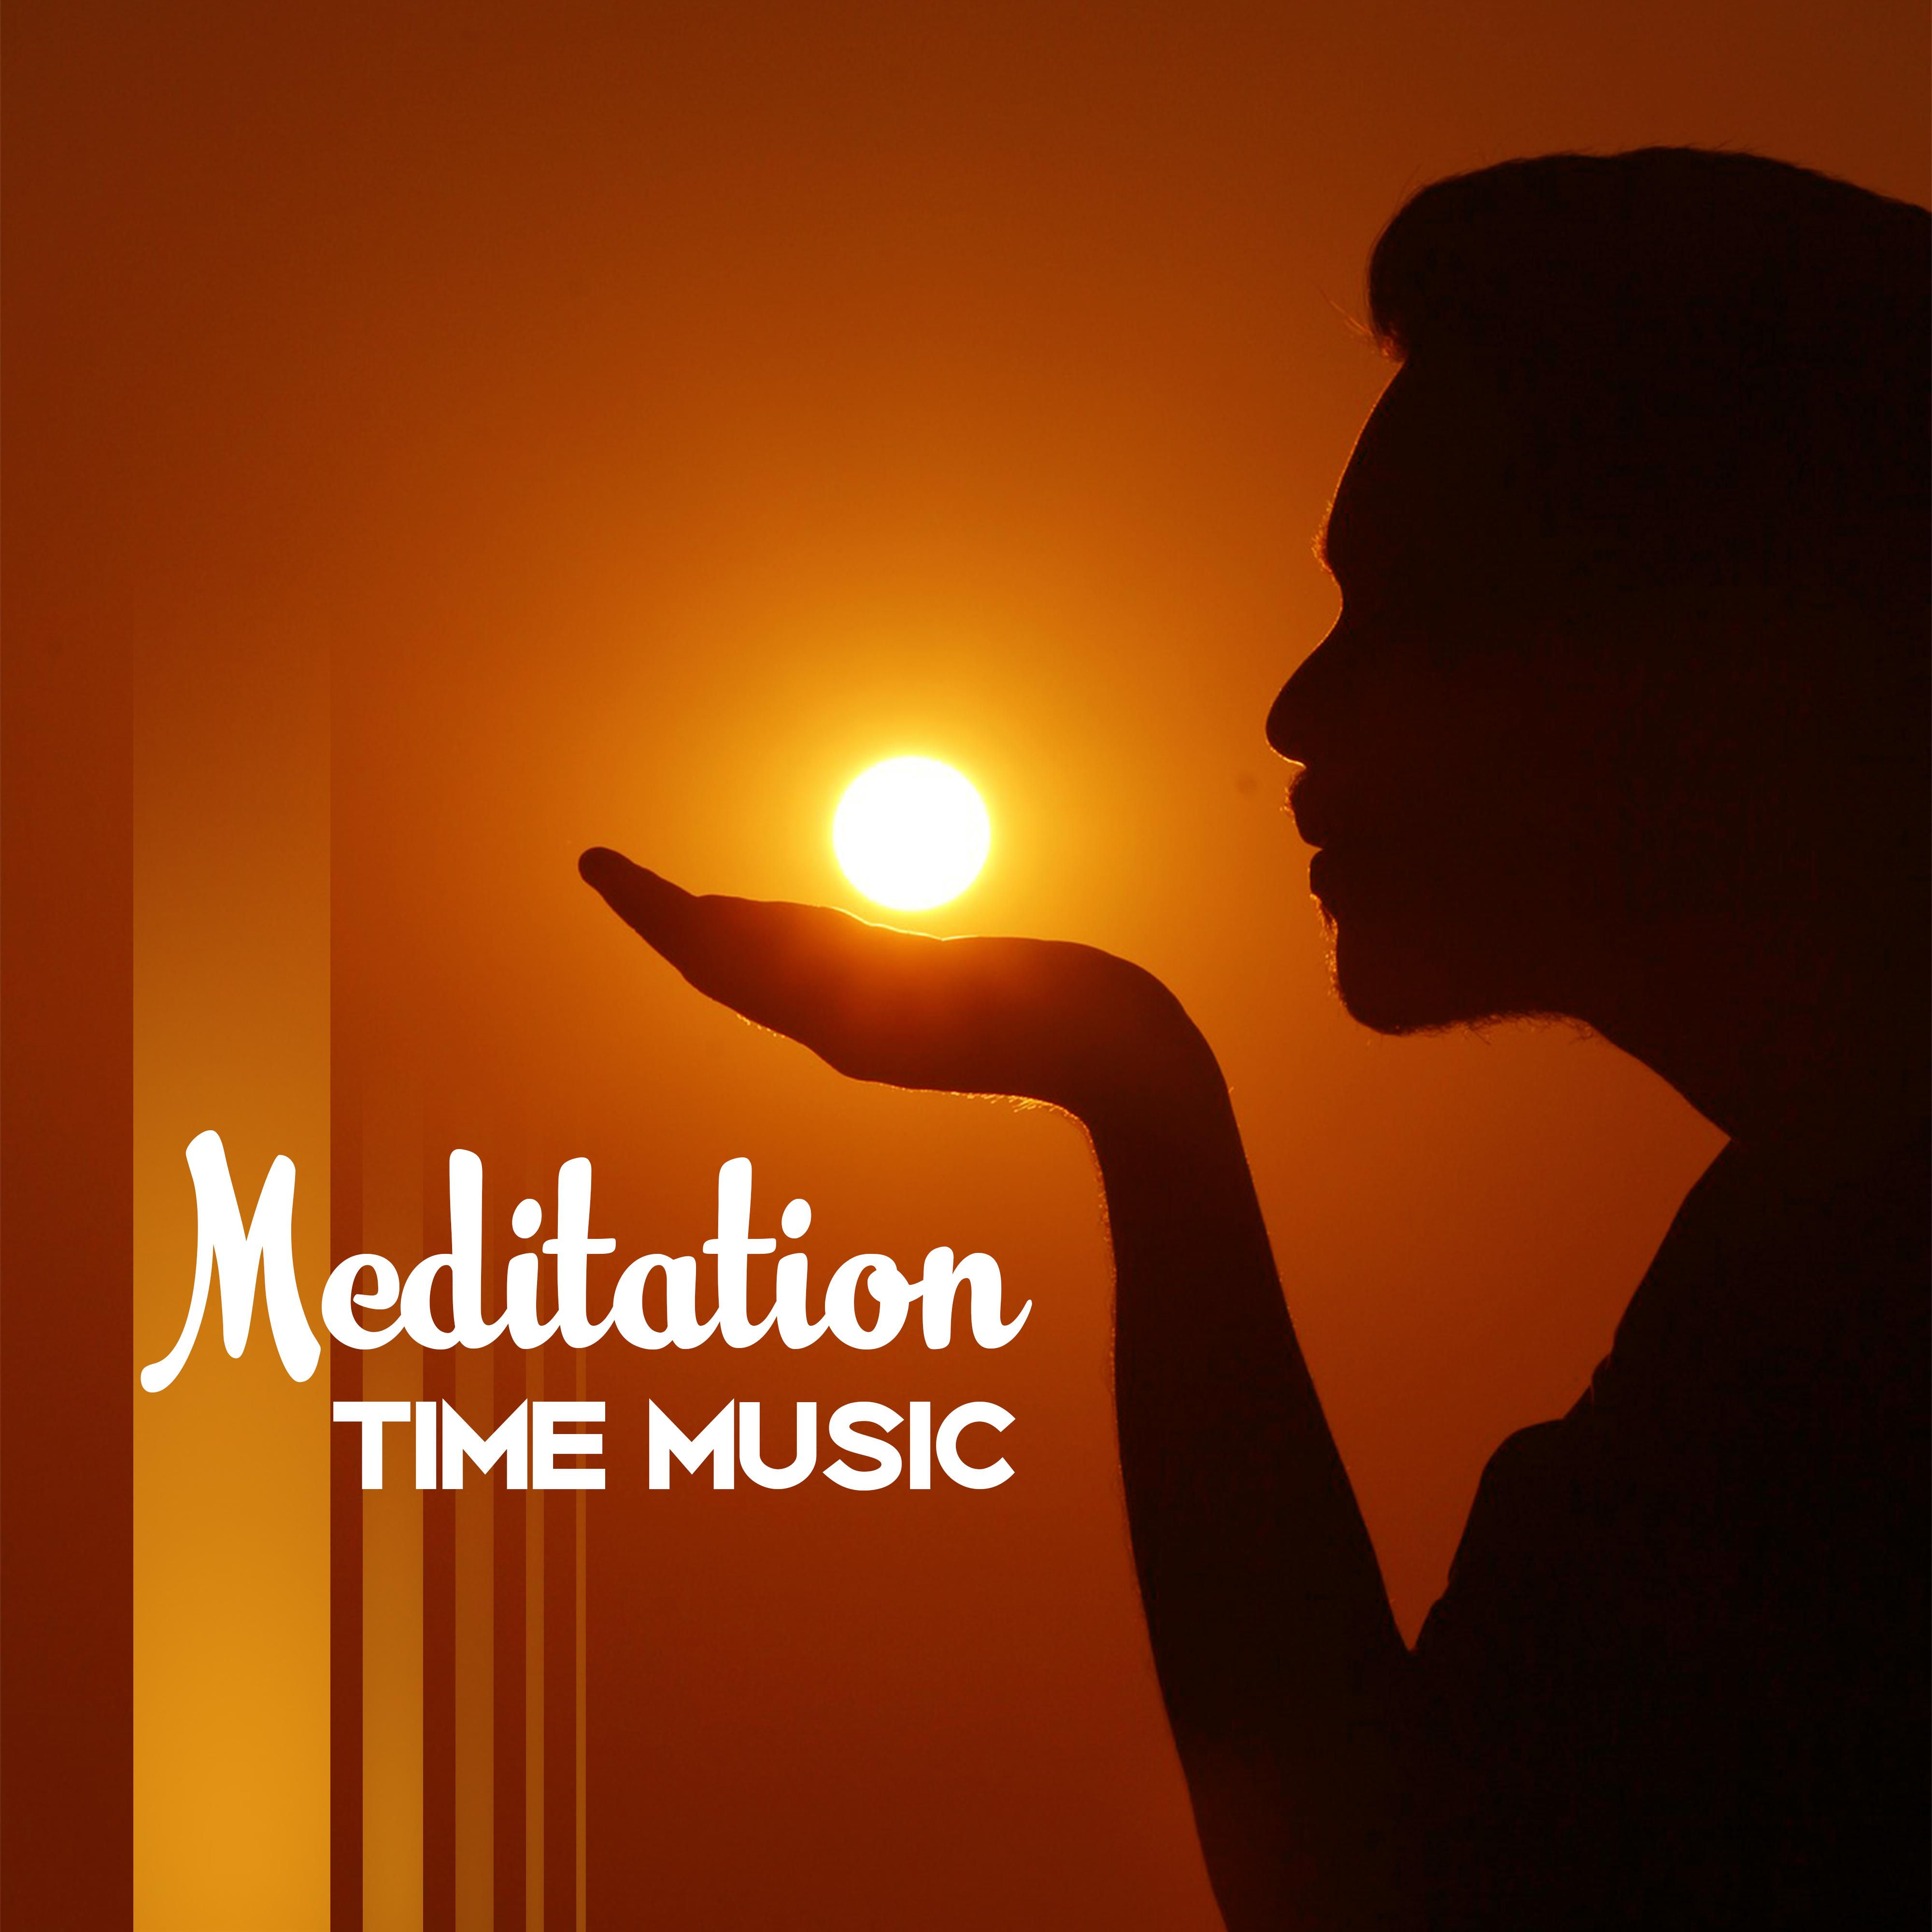 Meditation Time Music  - Deep Meditation, Yoga, Asian Music for Calm Down, Rest, New Age